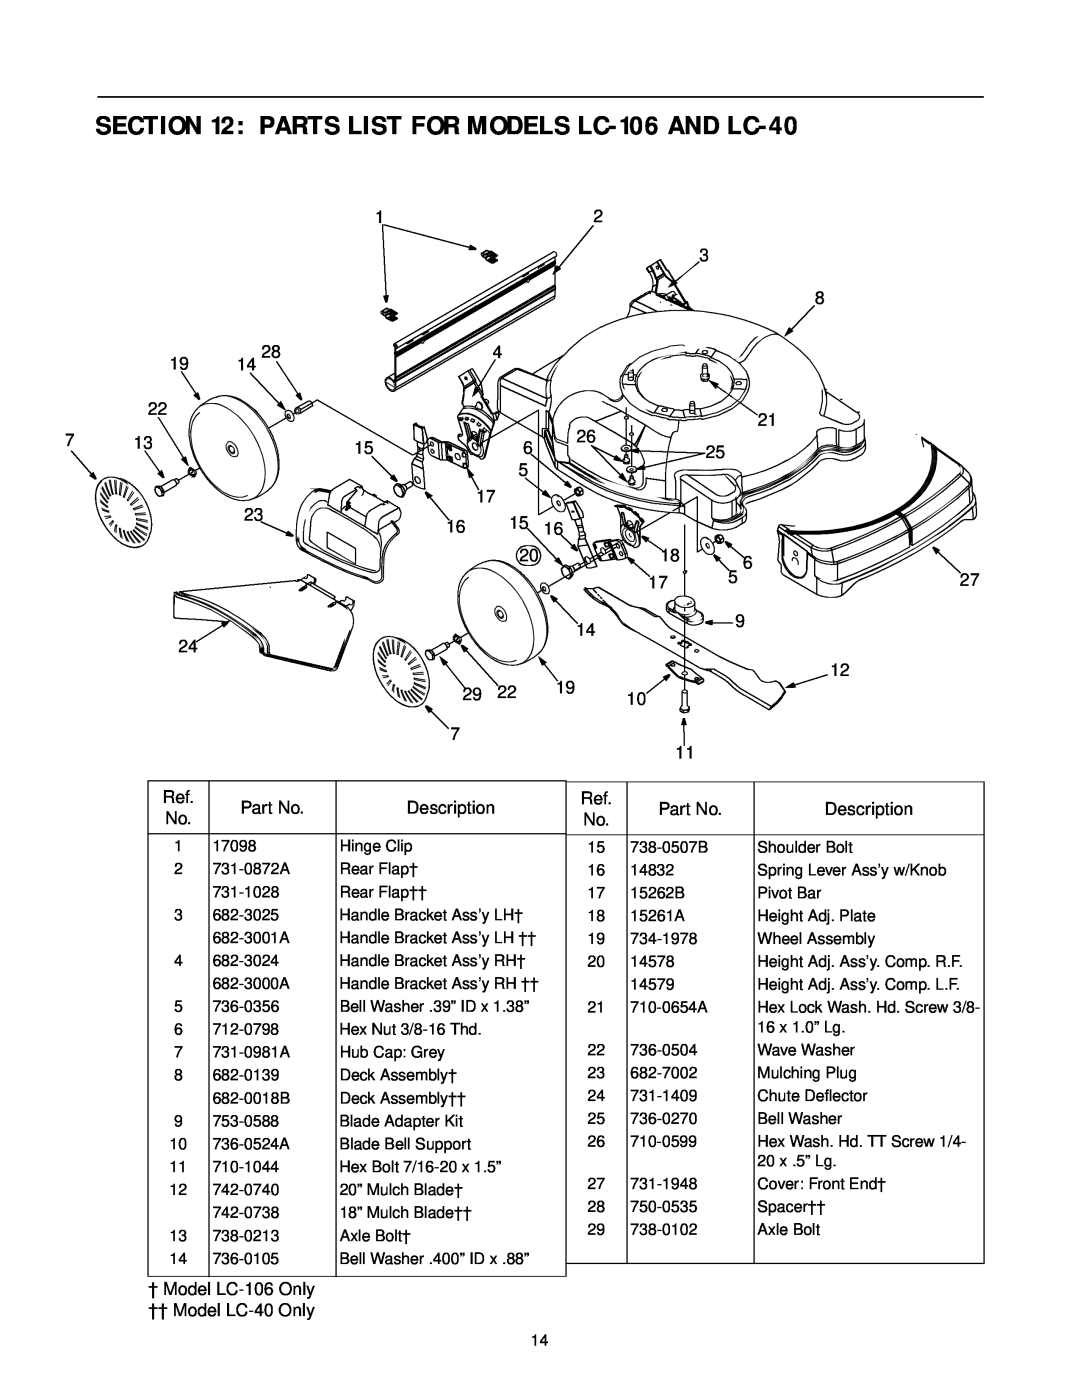 White manual PARTS LIST FOR MODELS LC-106AND LC-40 